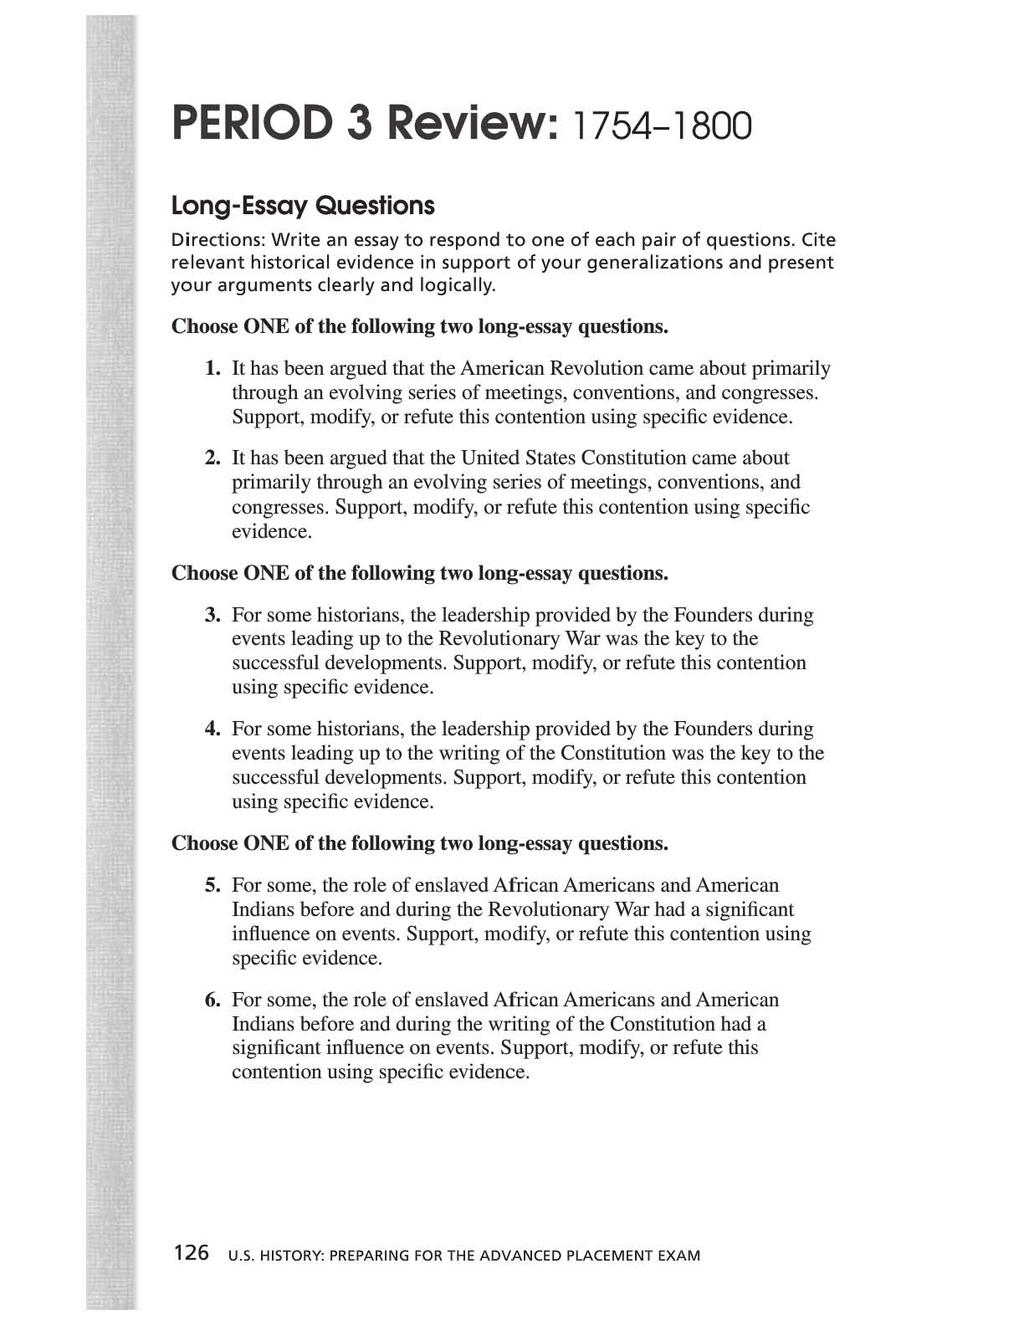 PERIOD 3 Review: 1754-1800 Long-Essay Questions Directions: Write an essay to respond to one of each pair of questions, Cite relevant historical evidence in support of your generalizations and